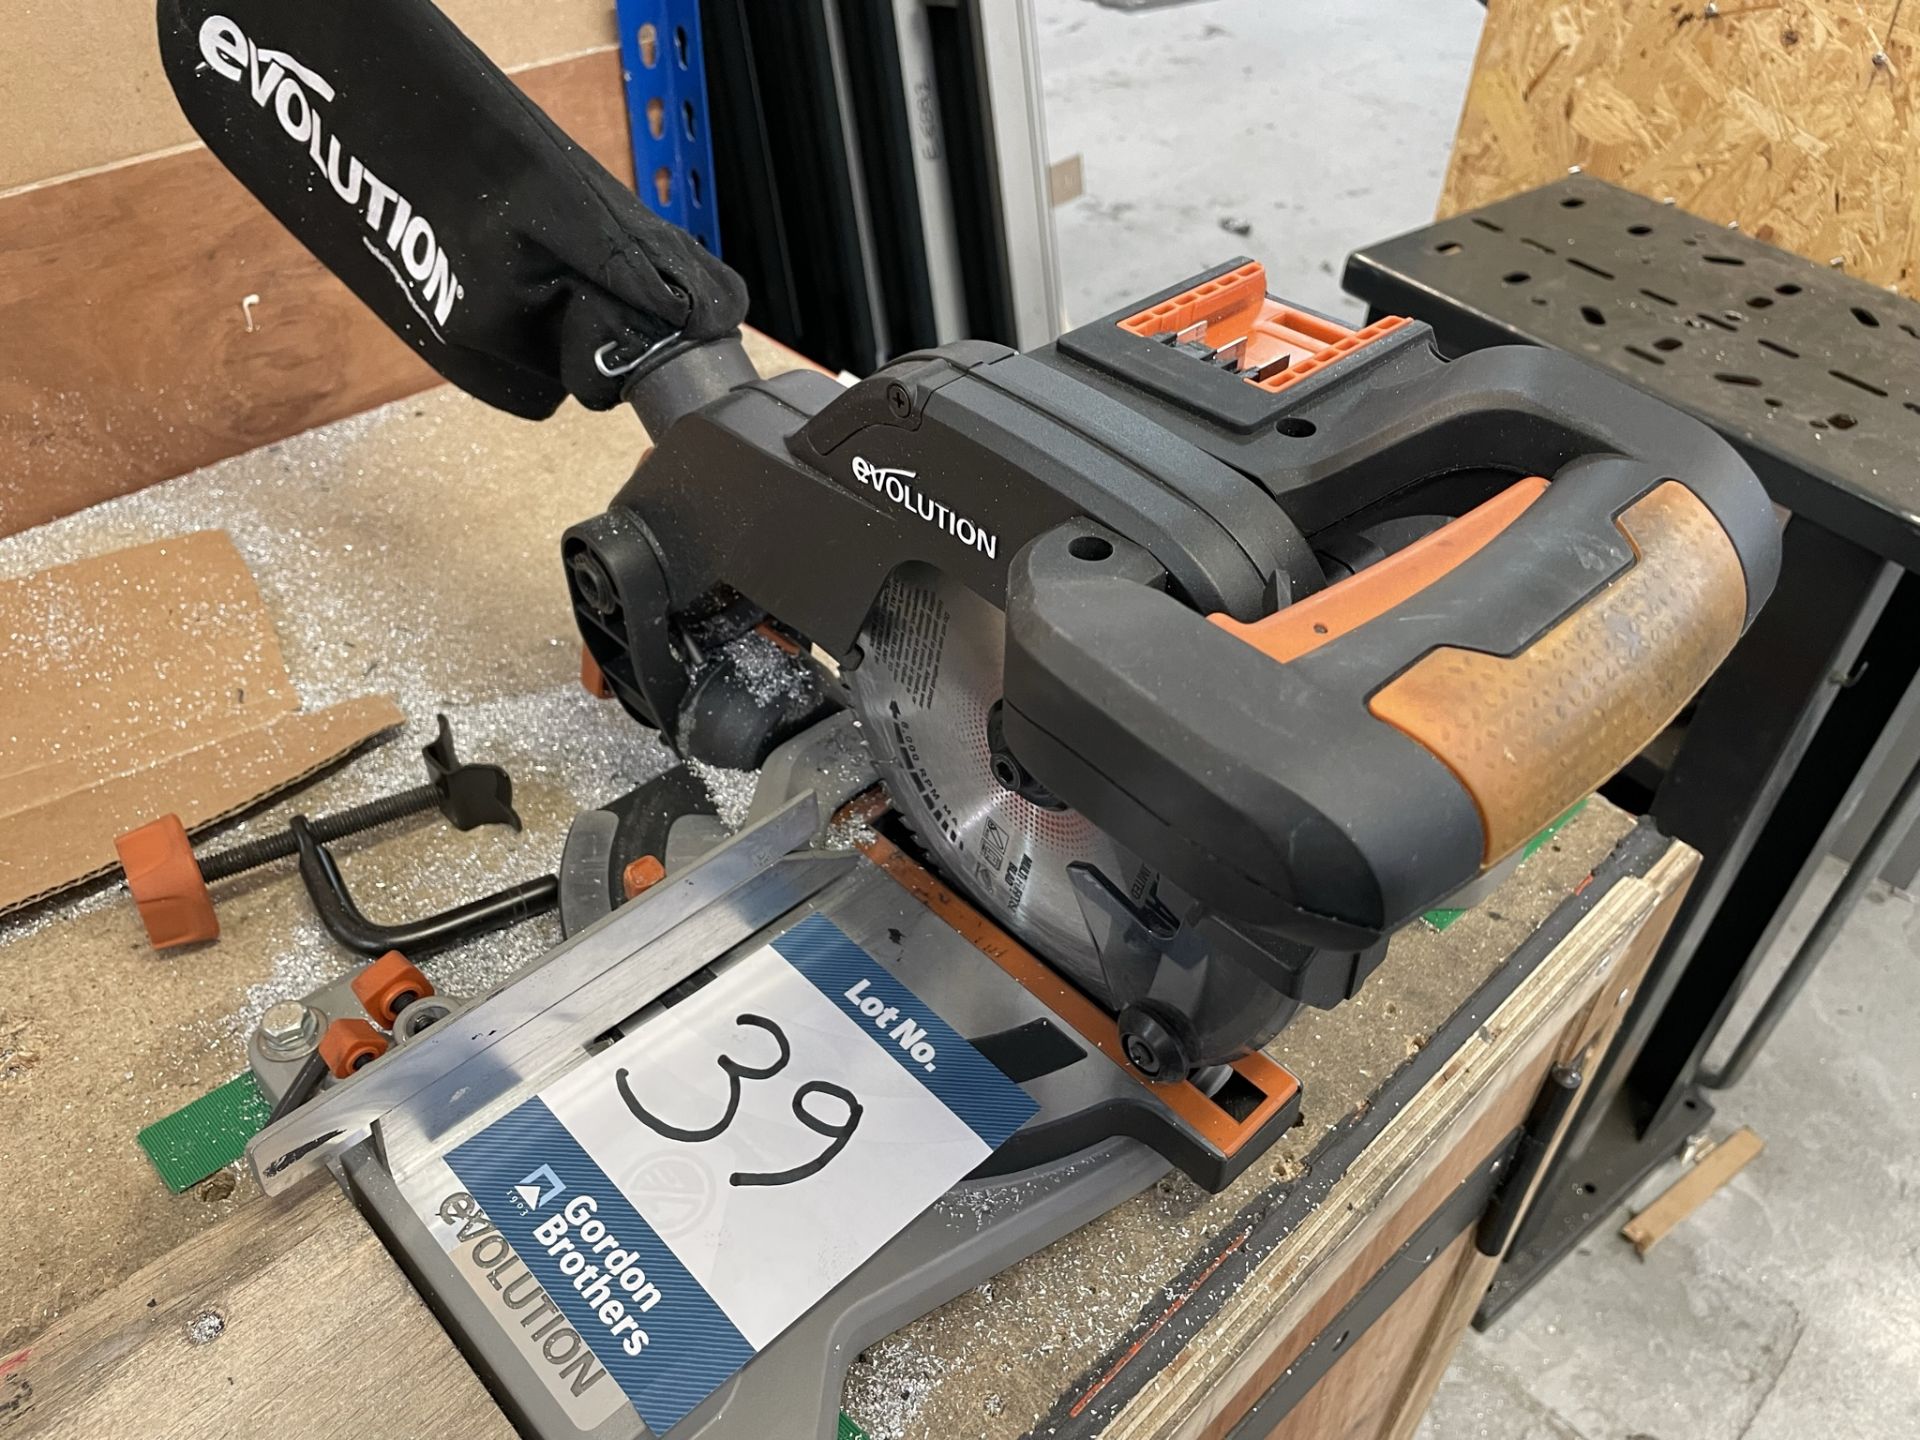 Evolution, R185 cordless mitre cut off saw (missing battery/charger)